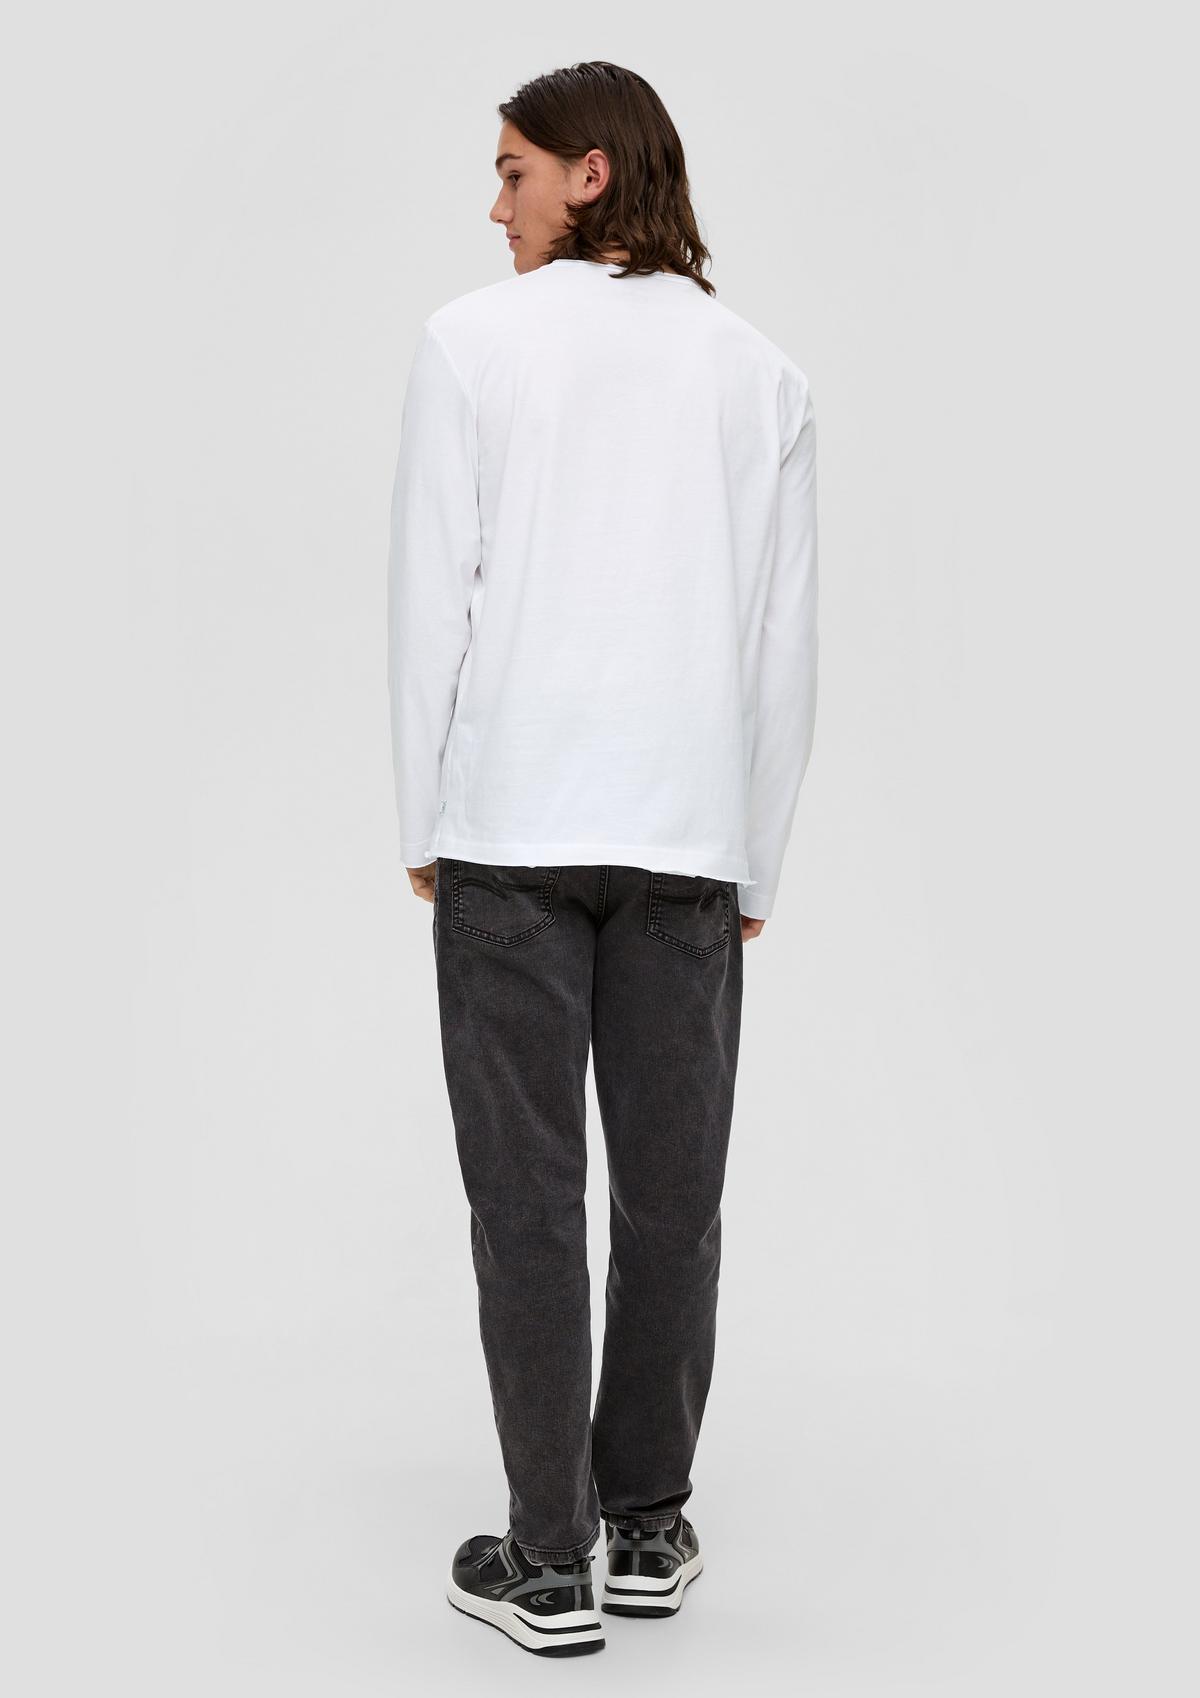 s.Oliver Garment-dyed long sleeve top